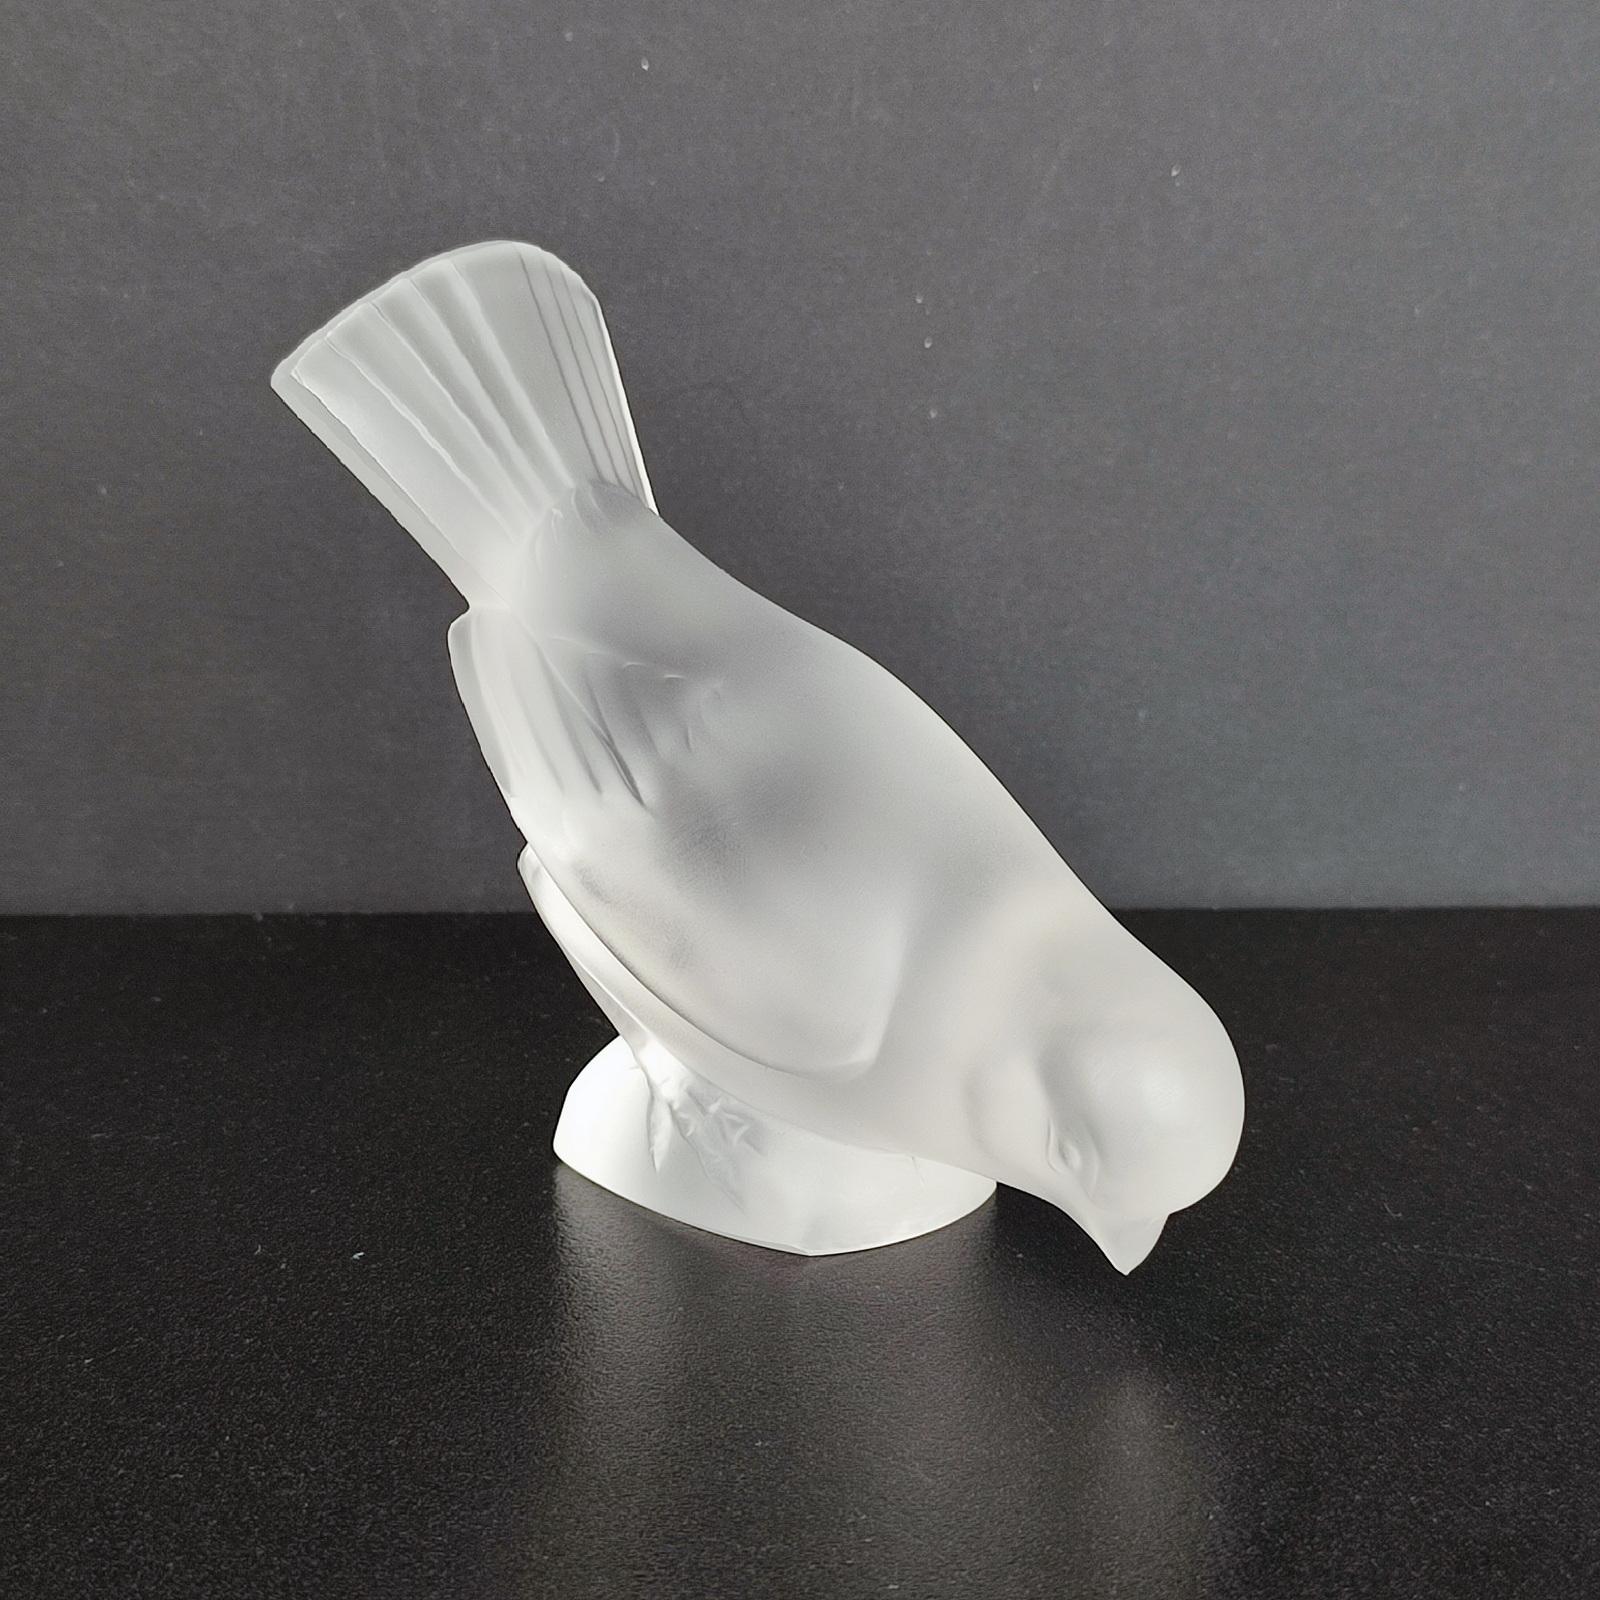 Vintage crystal Moineau Hardi from the Birds Series by René Lalique
Signed at the base Lalique France

Perfect condition.